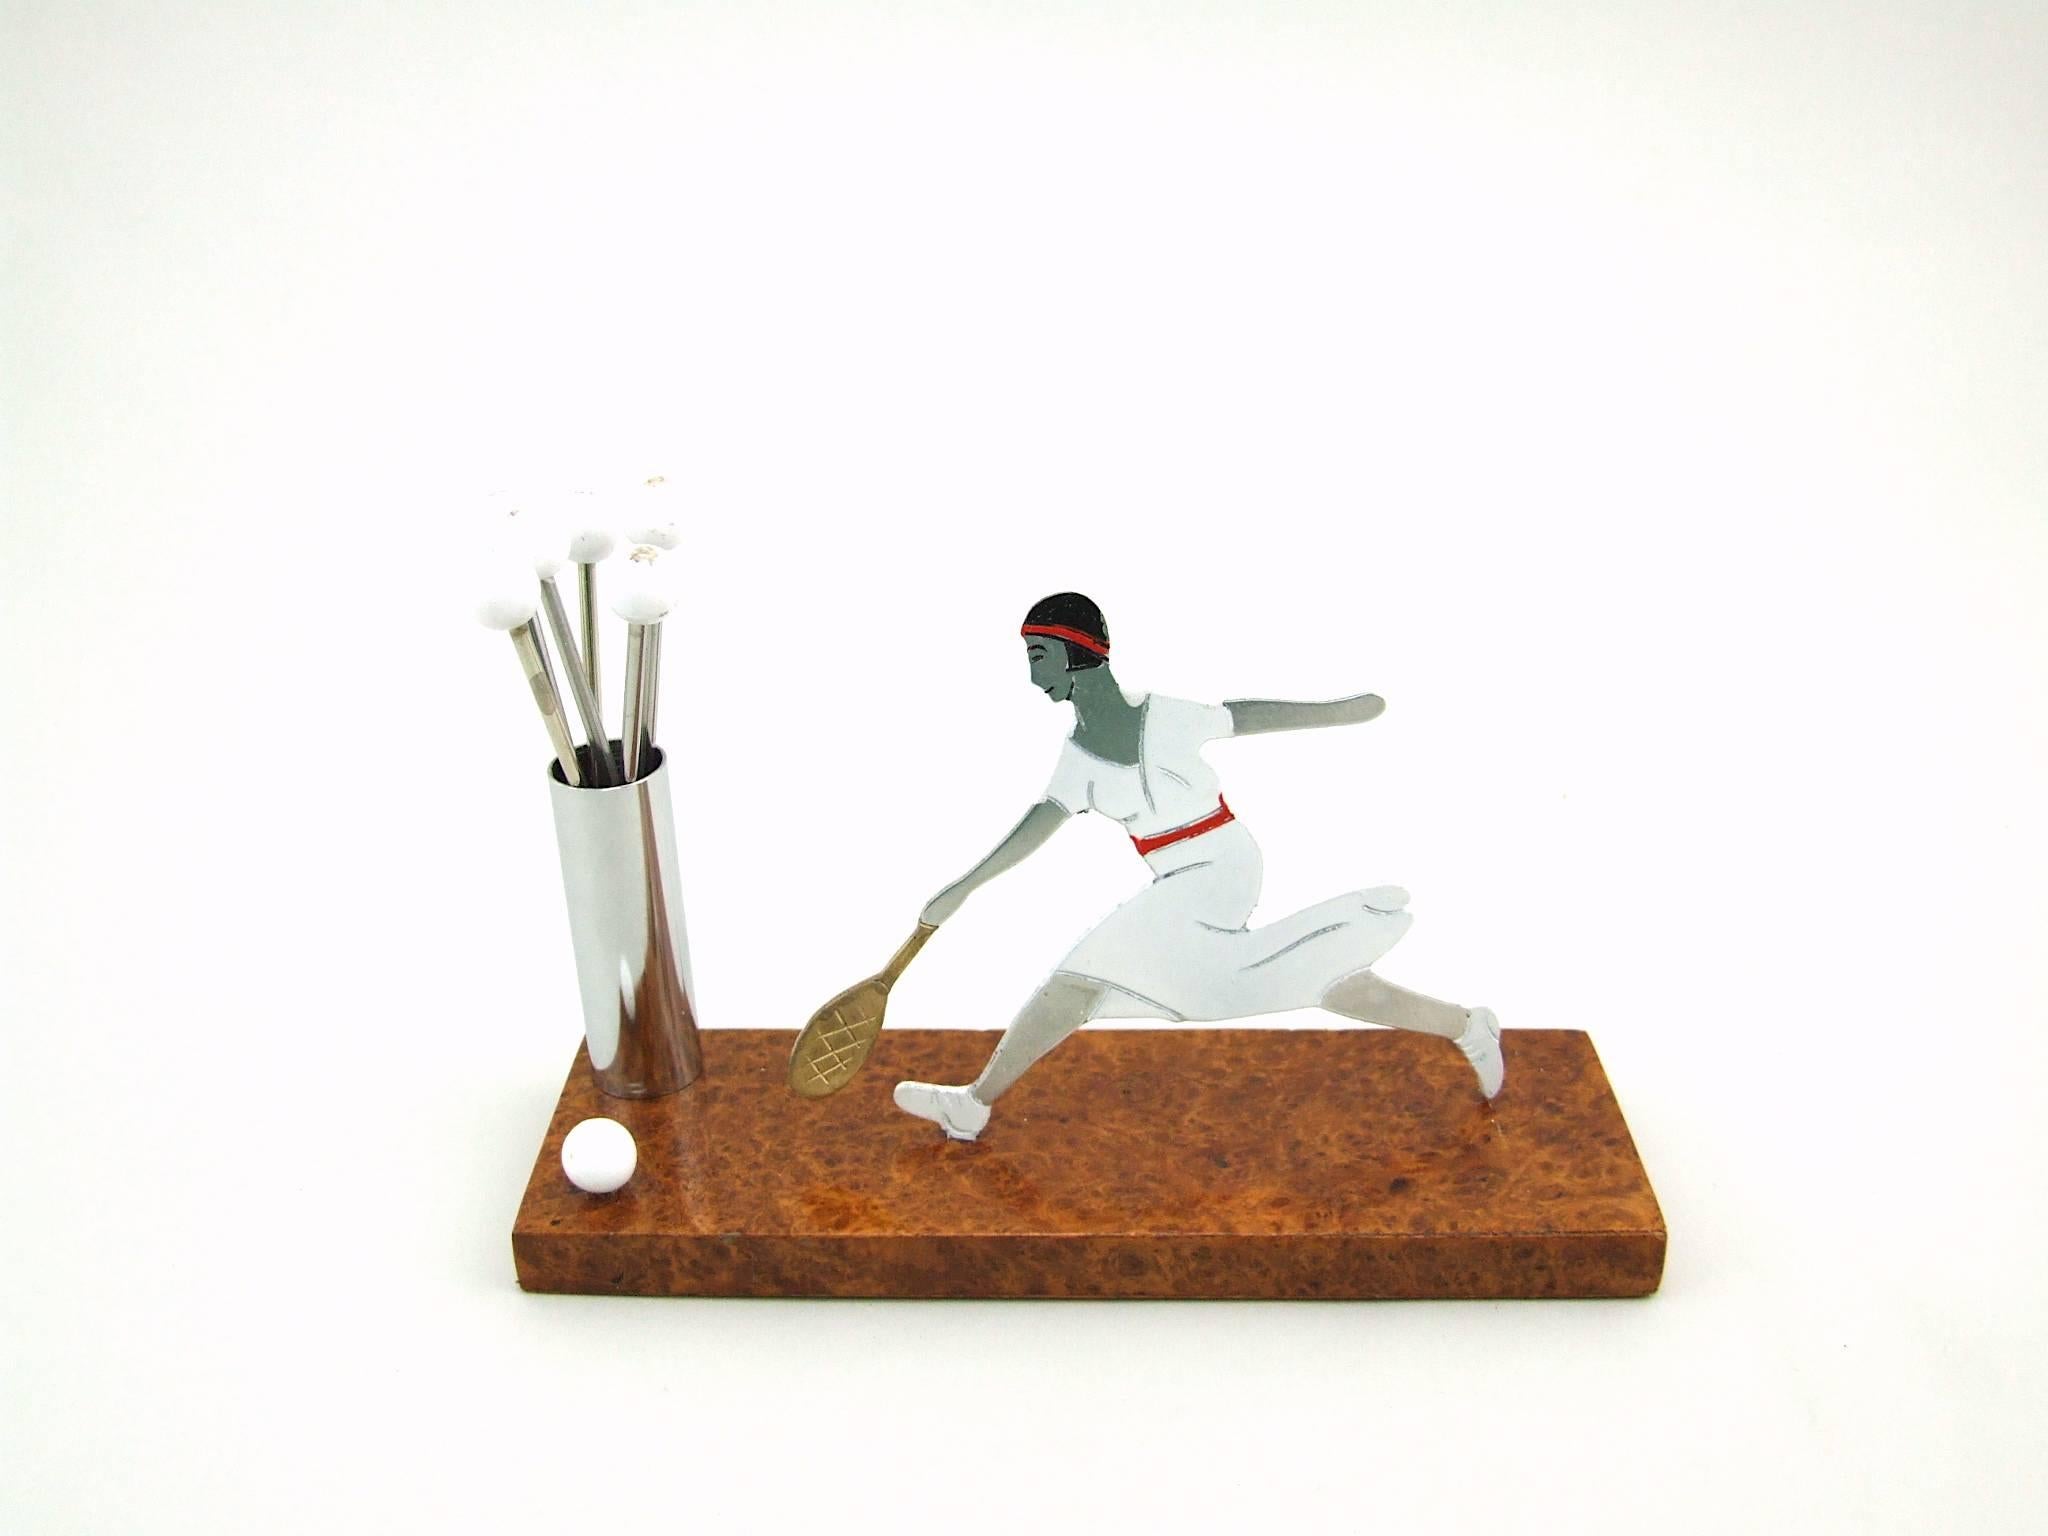 French Art Deco cocktail sticks set, modelled as Suzanne Lenglen the 1920s French tennis champion. Mounted on an amboyne wooden base that measures 6 inches long and total height is 4 inches (15cm x 10cm). In excellent vintage condition. An unsigned